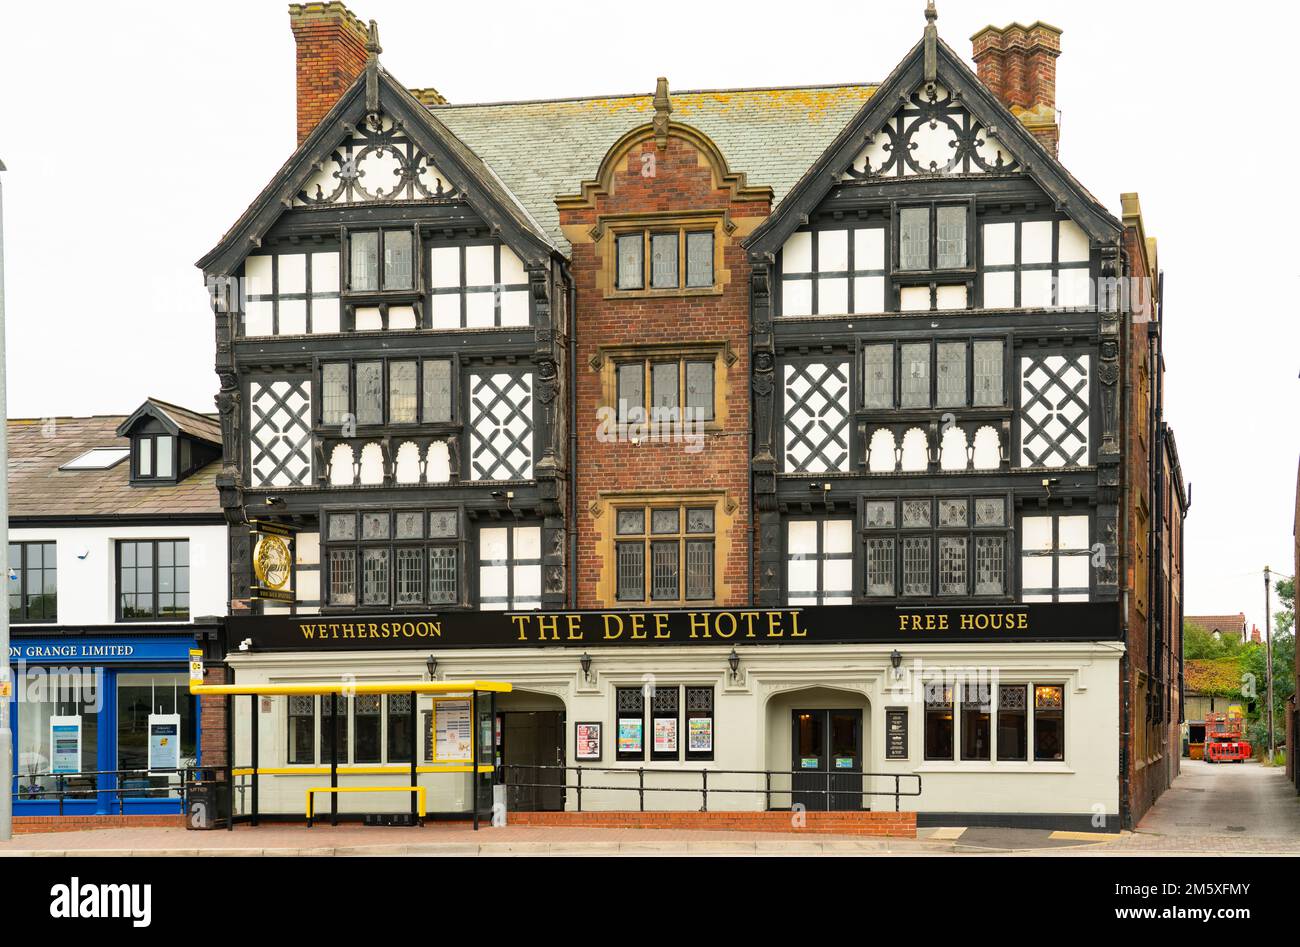 The Dee Hotel, West Kirby, Wirral, a Wetherspoon Pub. Image taken in July 2022. Stock Photo